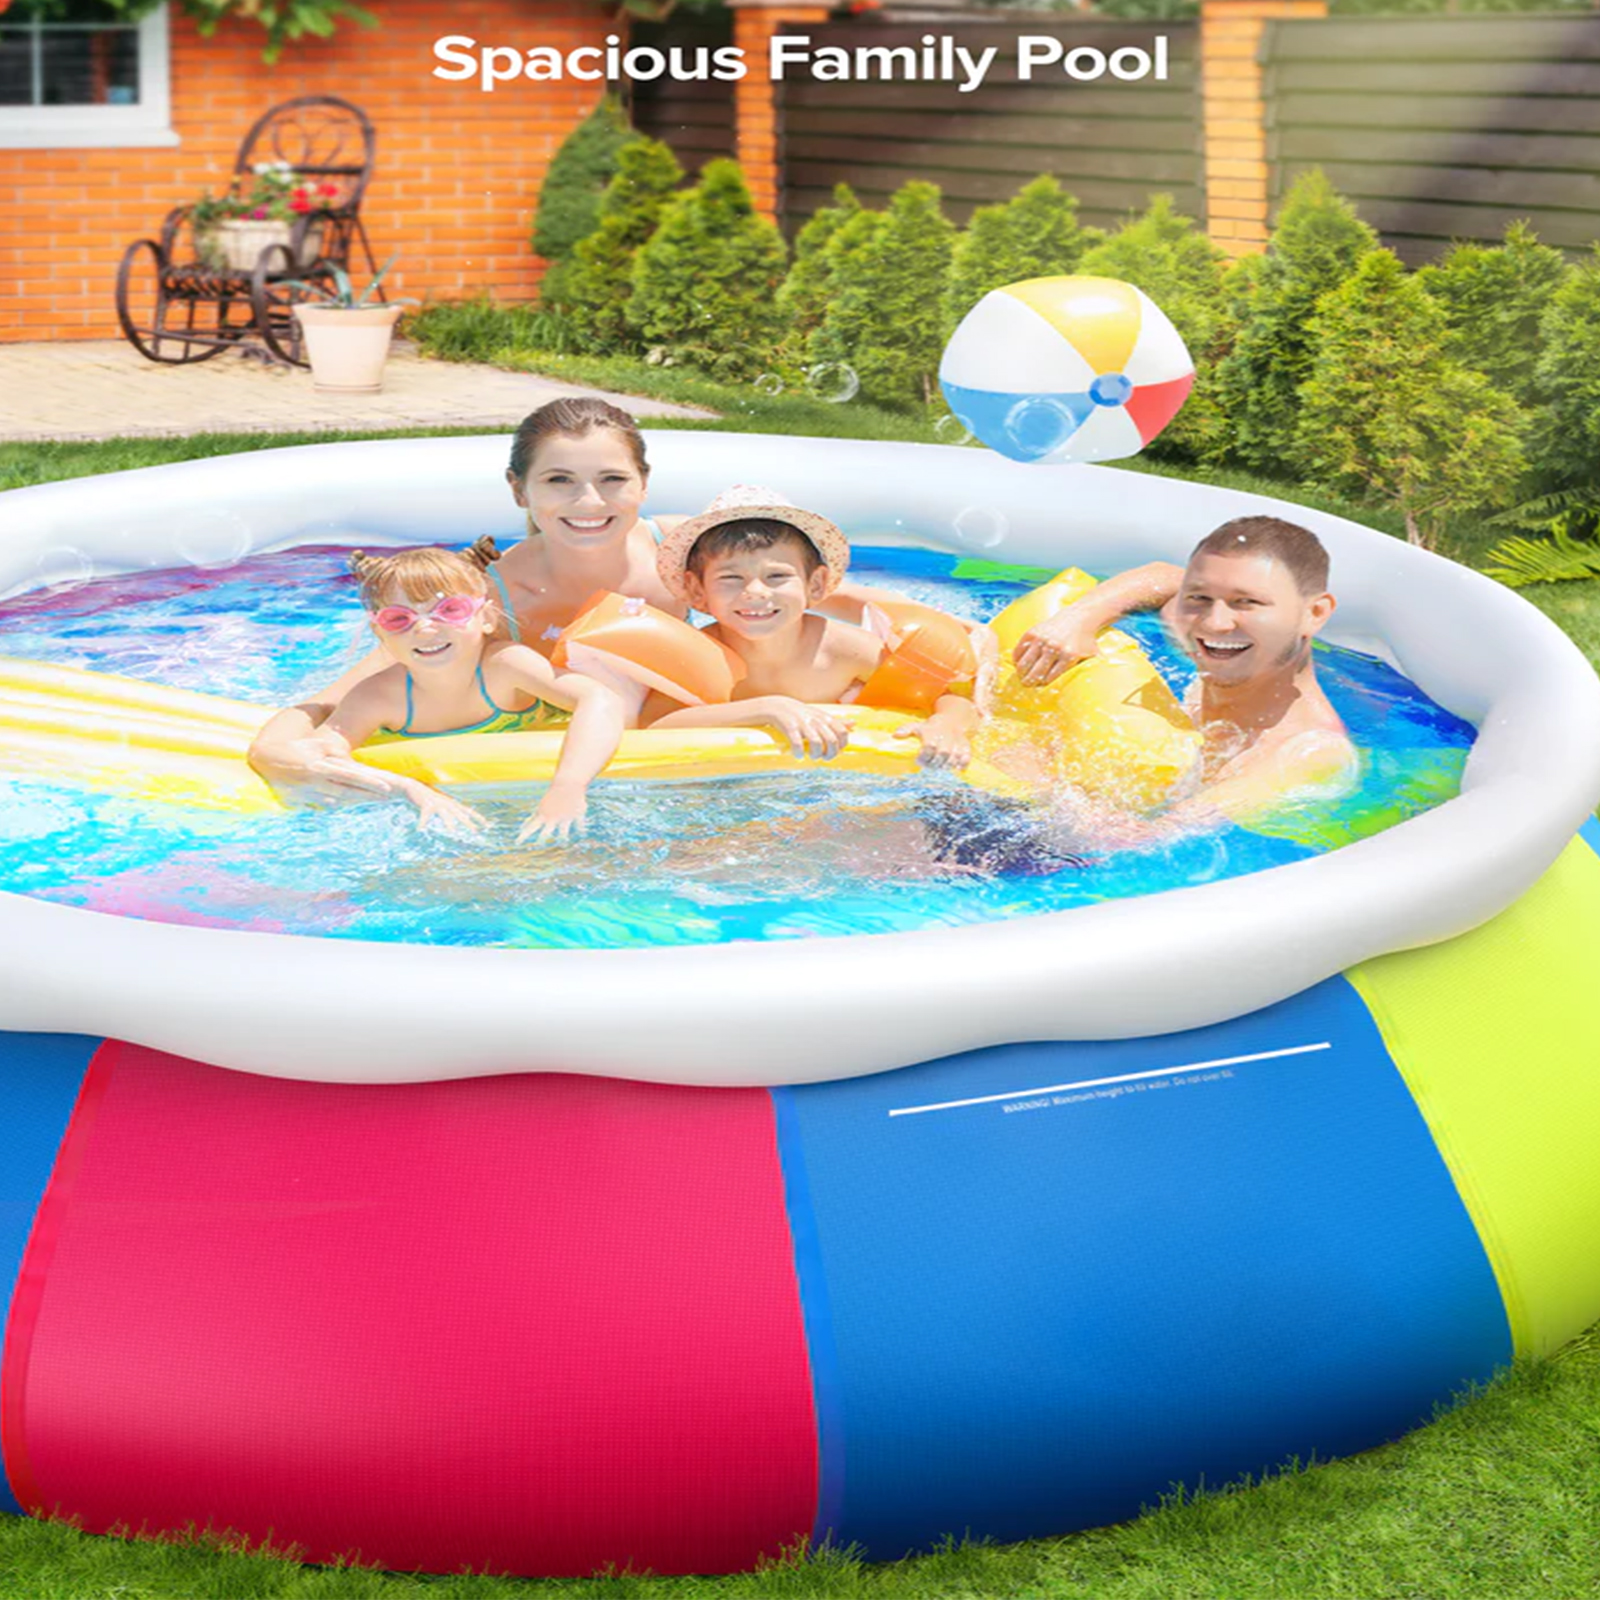 Family 10ft x 30in Above Ground Inflatable Round Swimming Pool - image 4 of 7